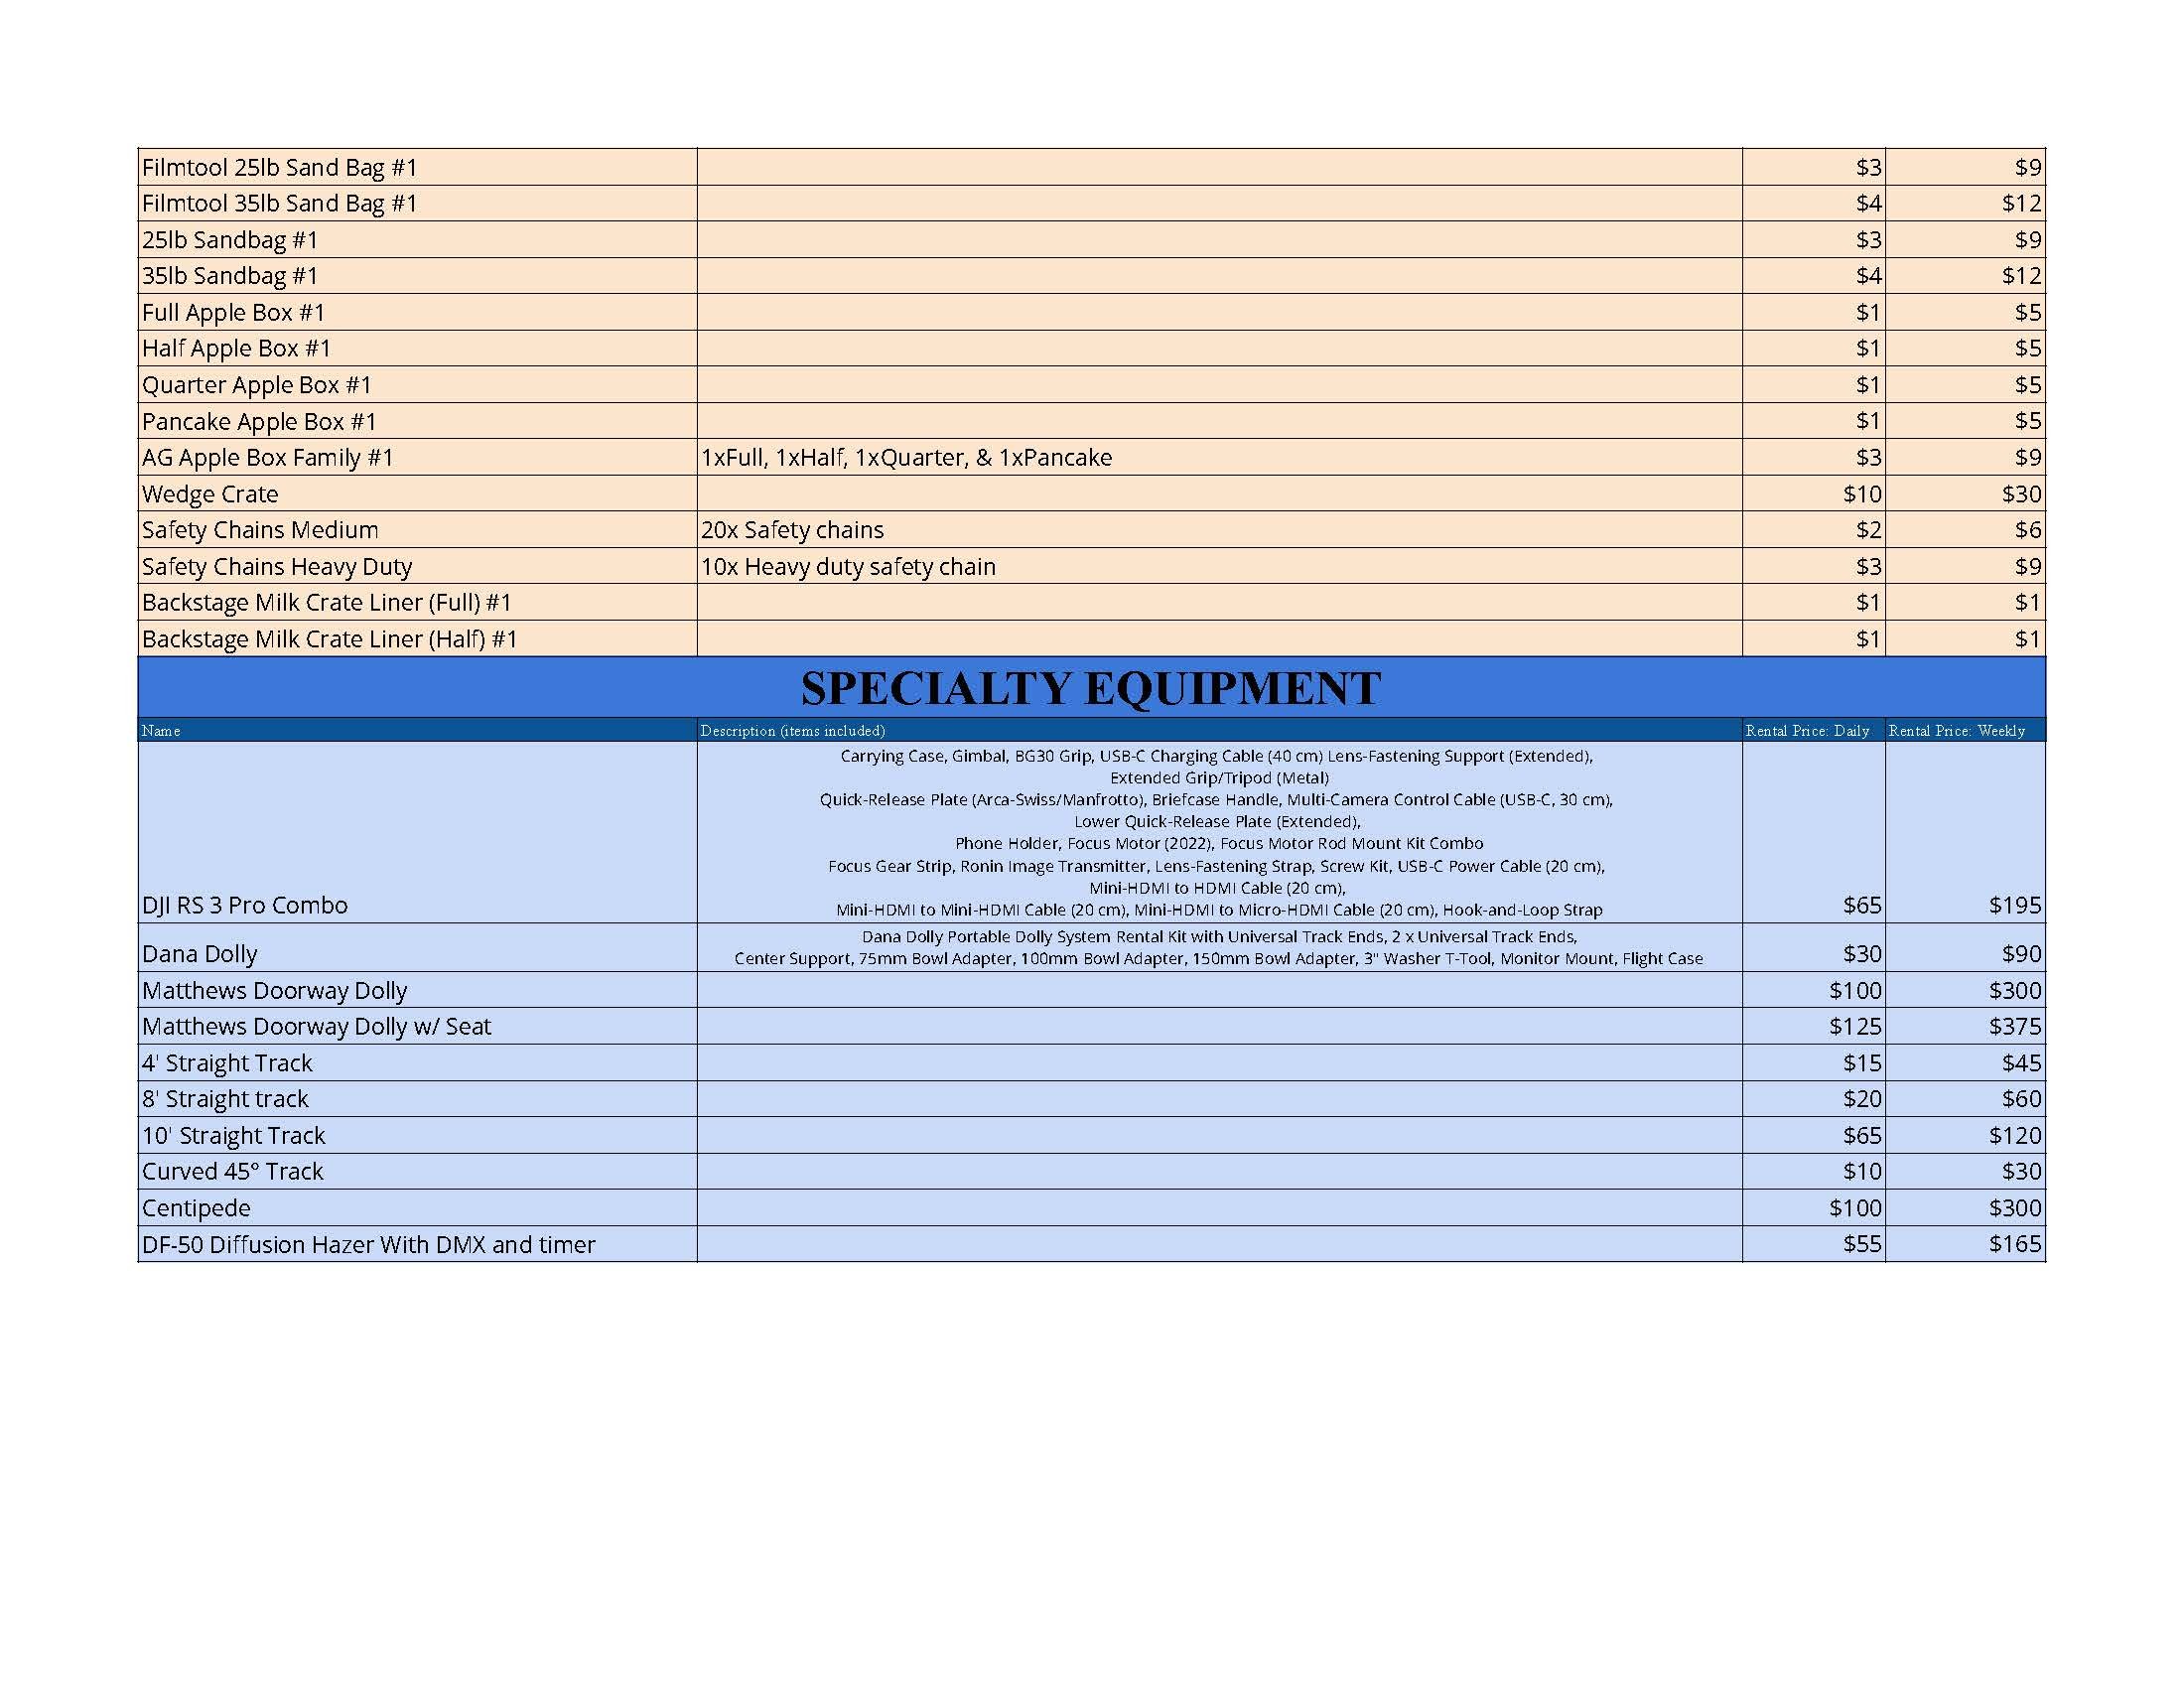 EZ Rent-Out Equipment Spreadsheet Assets - Copy of customer list_Page_7.jpg